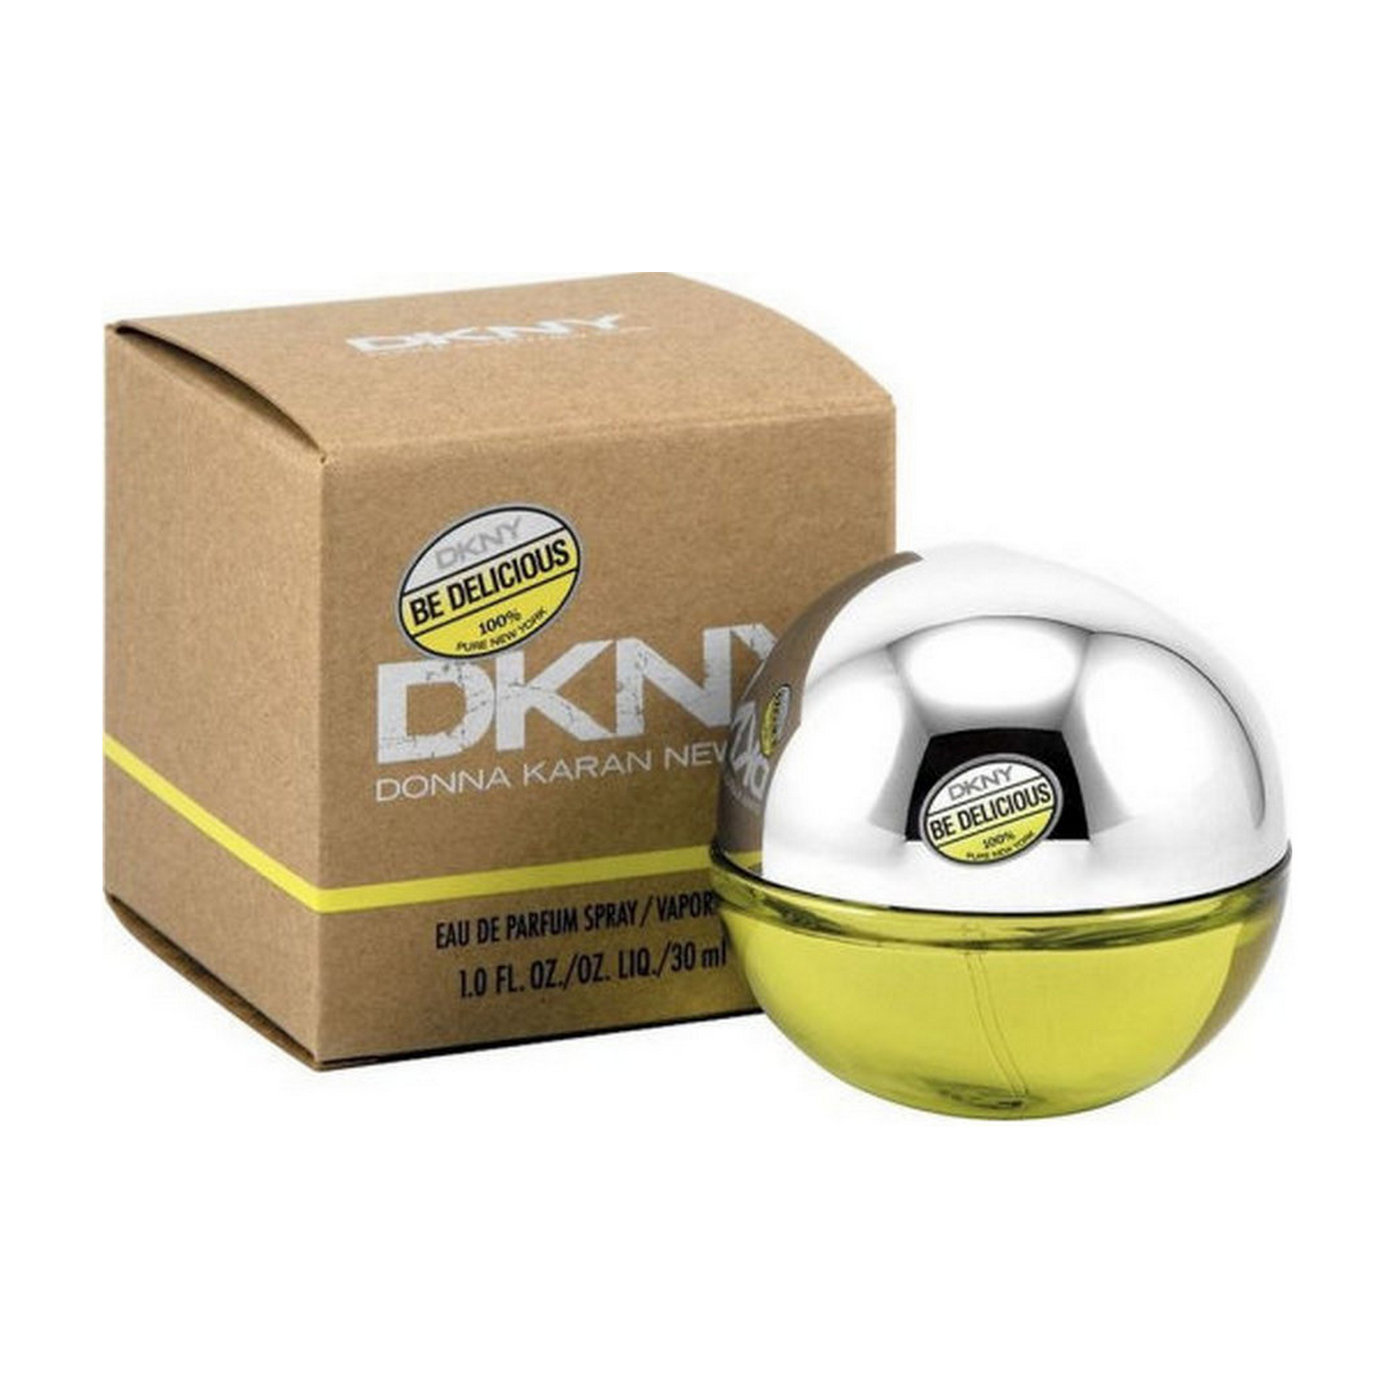 Dkny be delicious яблоко. DKNY be delicious 30 мл. Donna Karan DKNY be delicious, EDP, 100 ml. DKNY be delicious парфюмерная вода 30. Donna Karan DKNY be delicious for women.